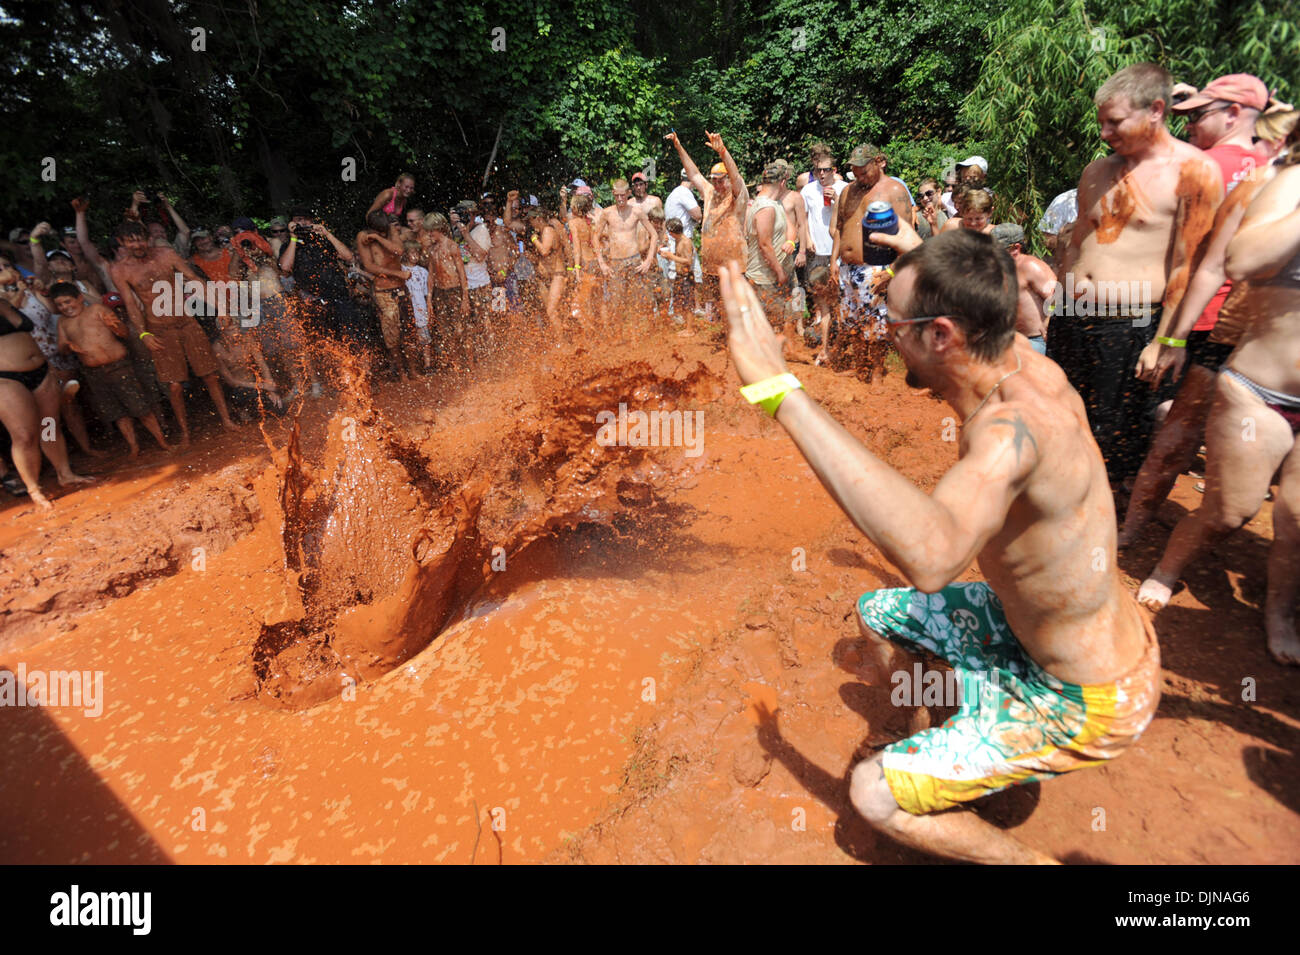 Mar 11, 2008 - East Dublin, Georgia, USA - Jeremiah Hatfield jumps in from a backhoe during the Mudpit Belly Flop event during the 13th annual Summer Redneck Games at Buckeye Park in East Dublin, Georgia, on Saturday. The annual homage to Southerners, began as a spoof to the 1996 Summer Olympics in Atlanta. Thousands of revelers attend the event whose events include bobbing for pig Stock Photo